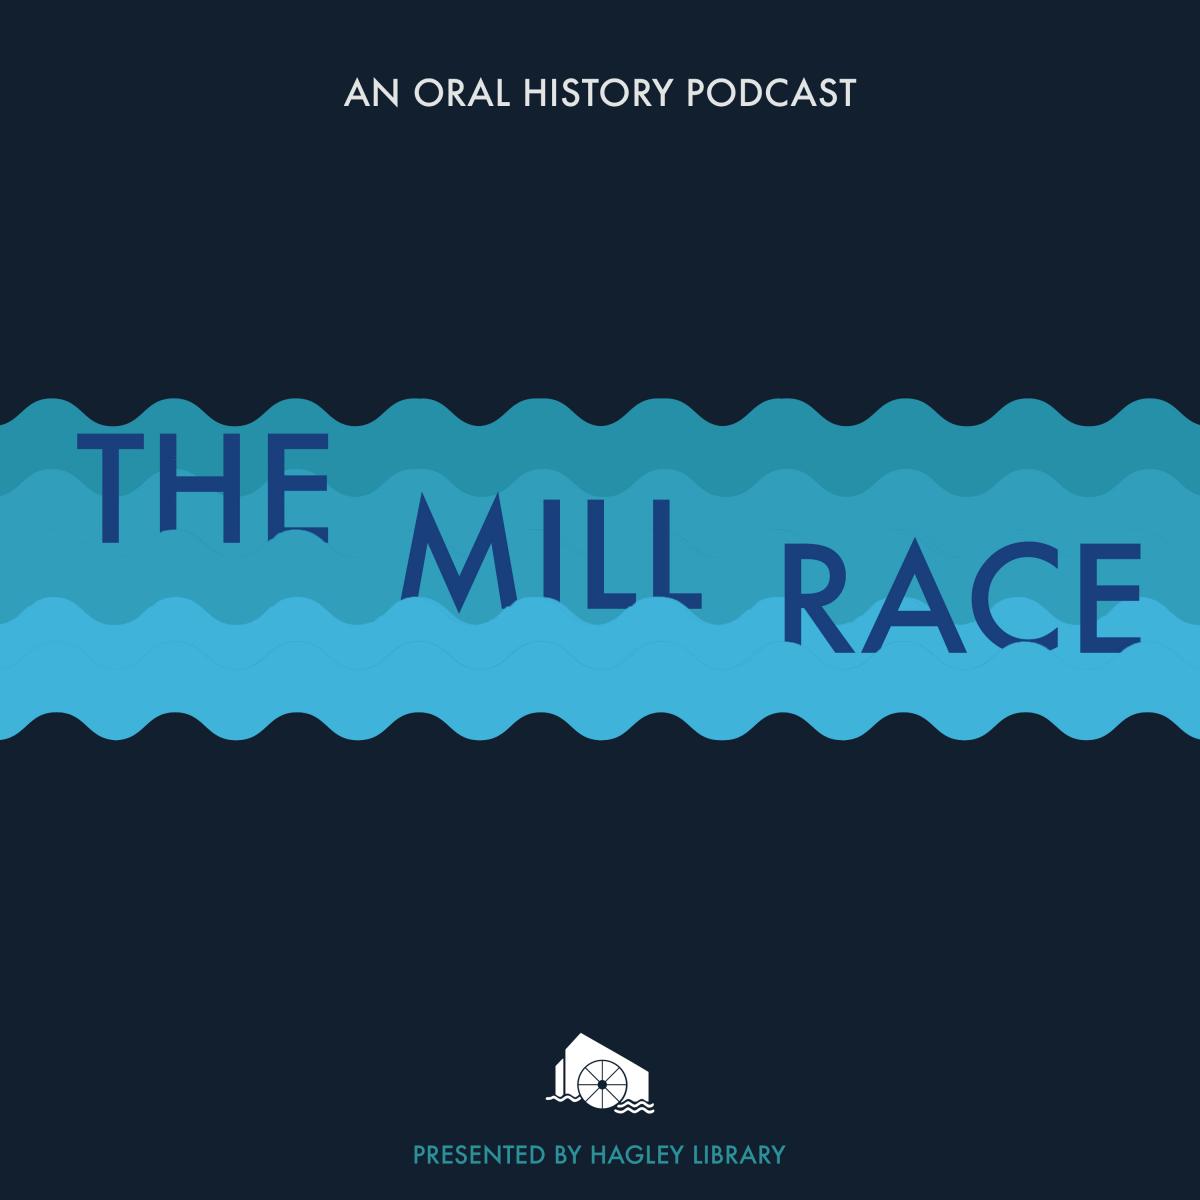 The Millrace: An Oral History Podcast cover art which featured that text and blue waves